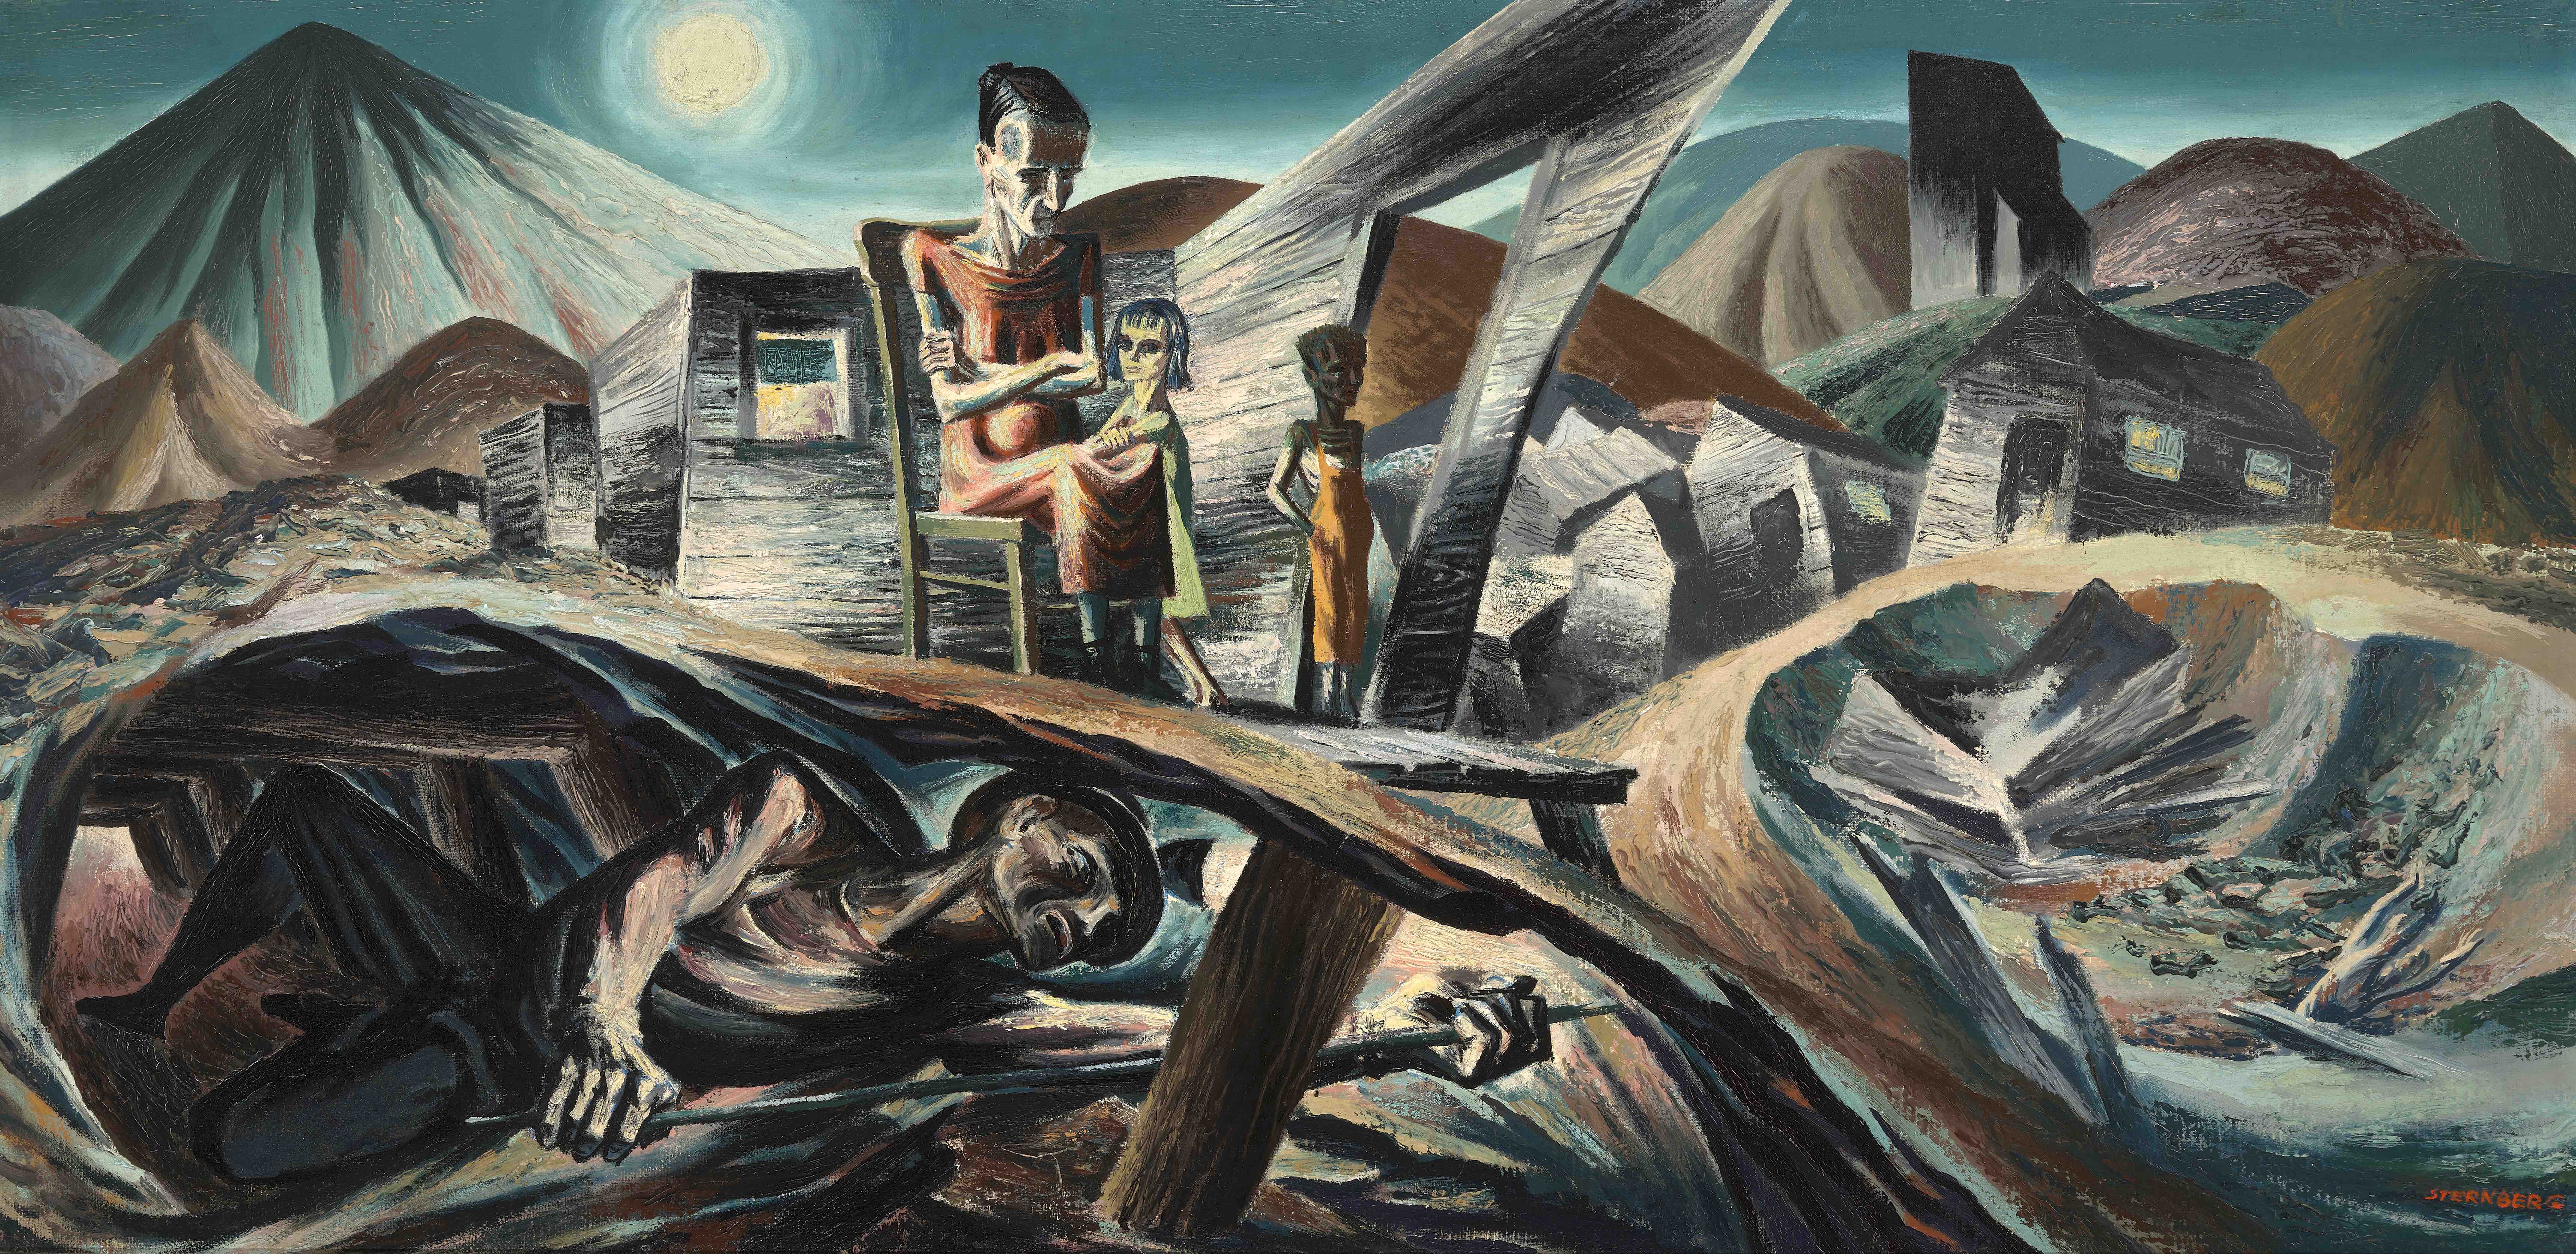 Harry Sternberg (1904-2001), Coalminer and Family, 1938. Oil on panel, 24" x 48". From the collection of Sandra and Bram Dijkstra.